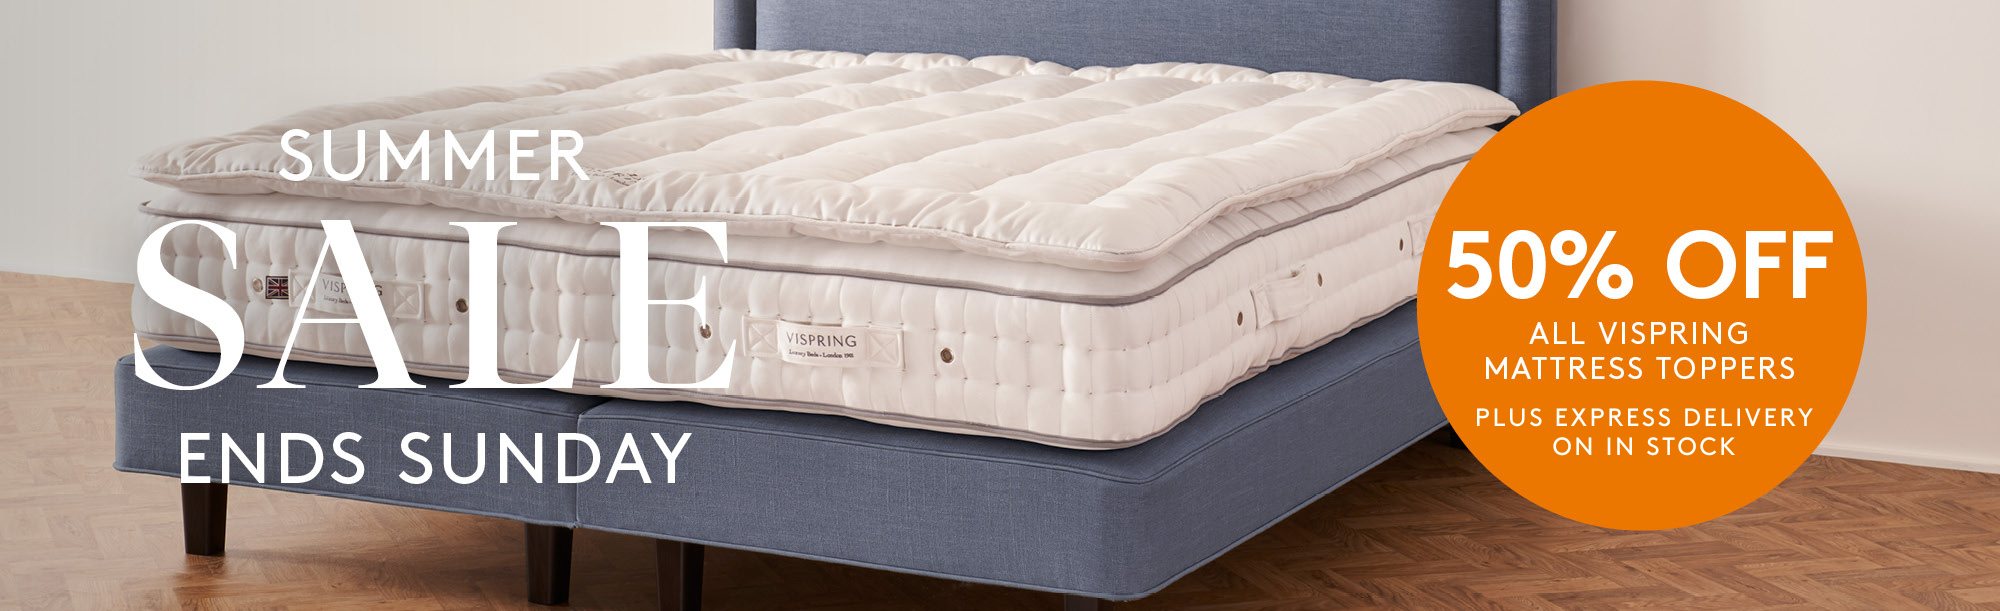 And So To Bed Summer Sale Offer 50% Off Vispring Mattress Toppers